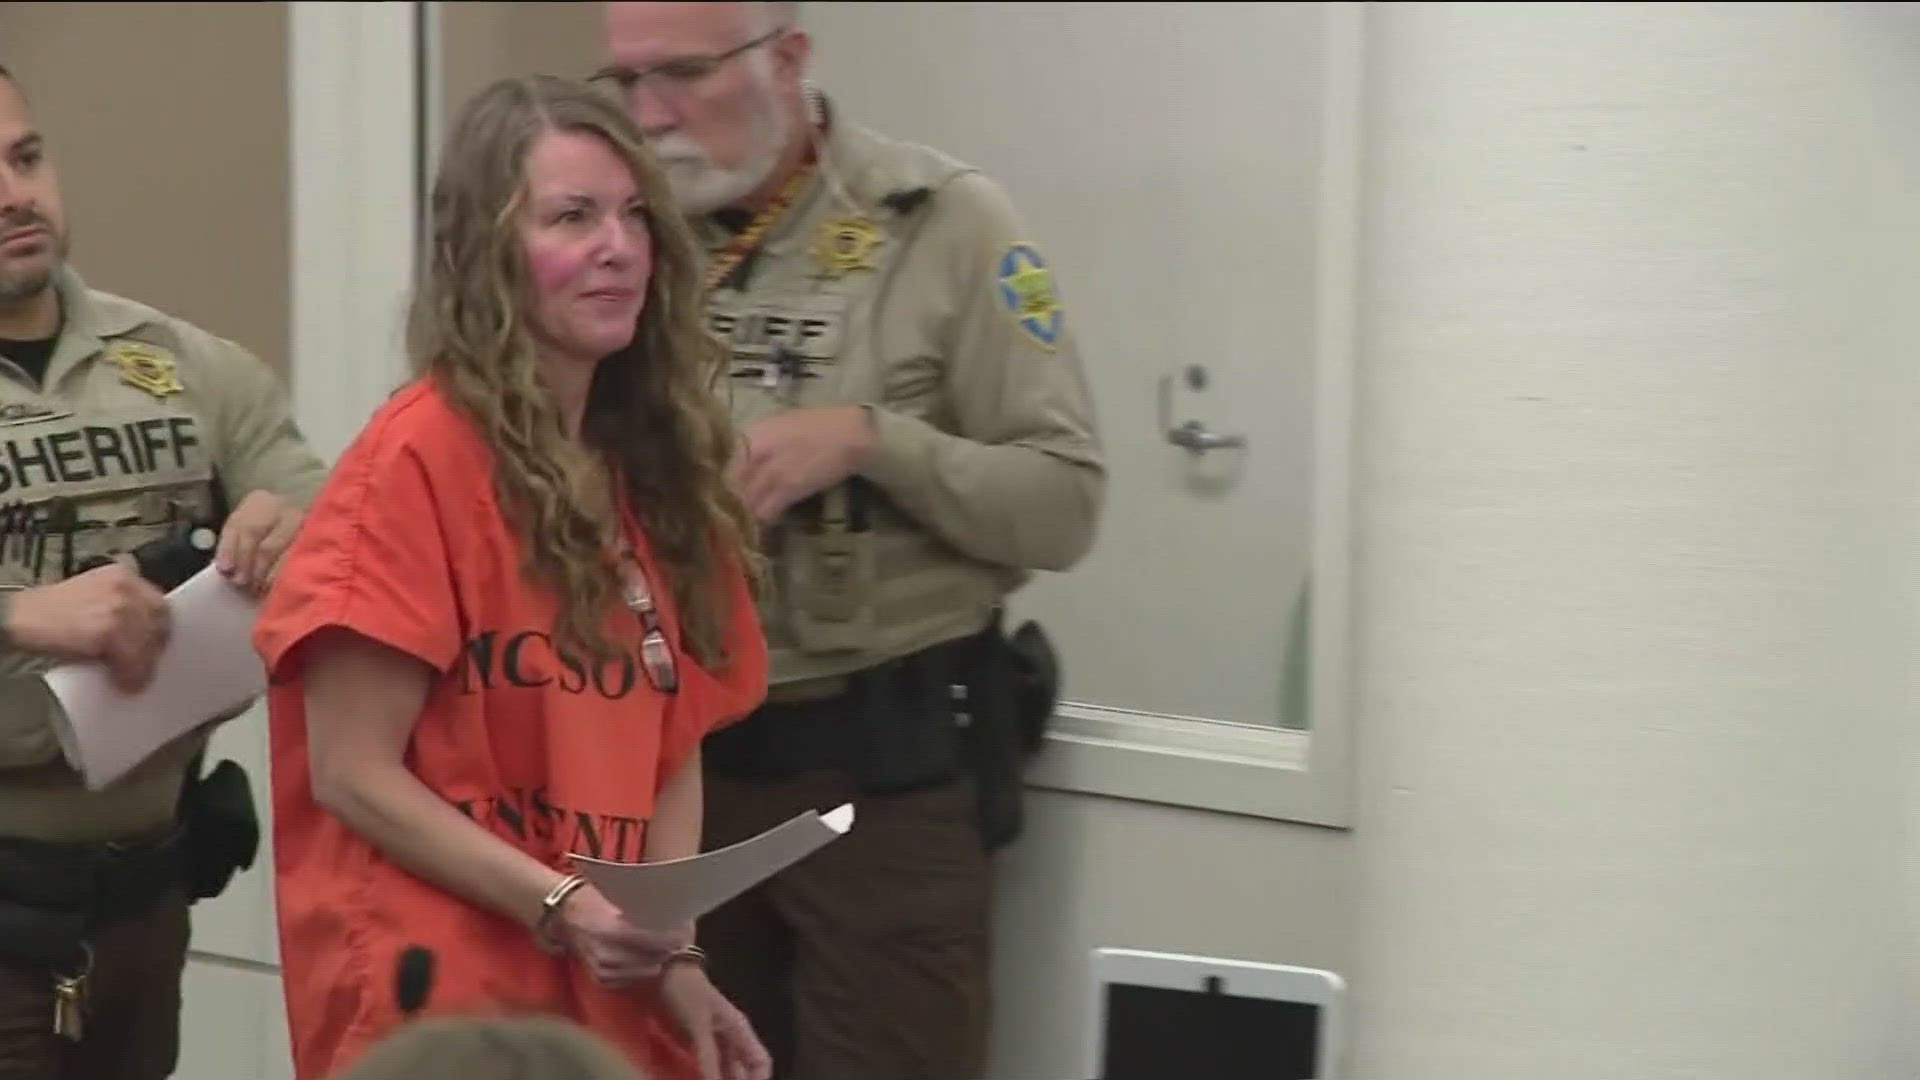 Lori Vallow Daybell is facing two first-degree murder charges in Arizona. She entered a not guilty plea during her arraignment on Thursday.